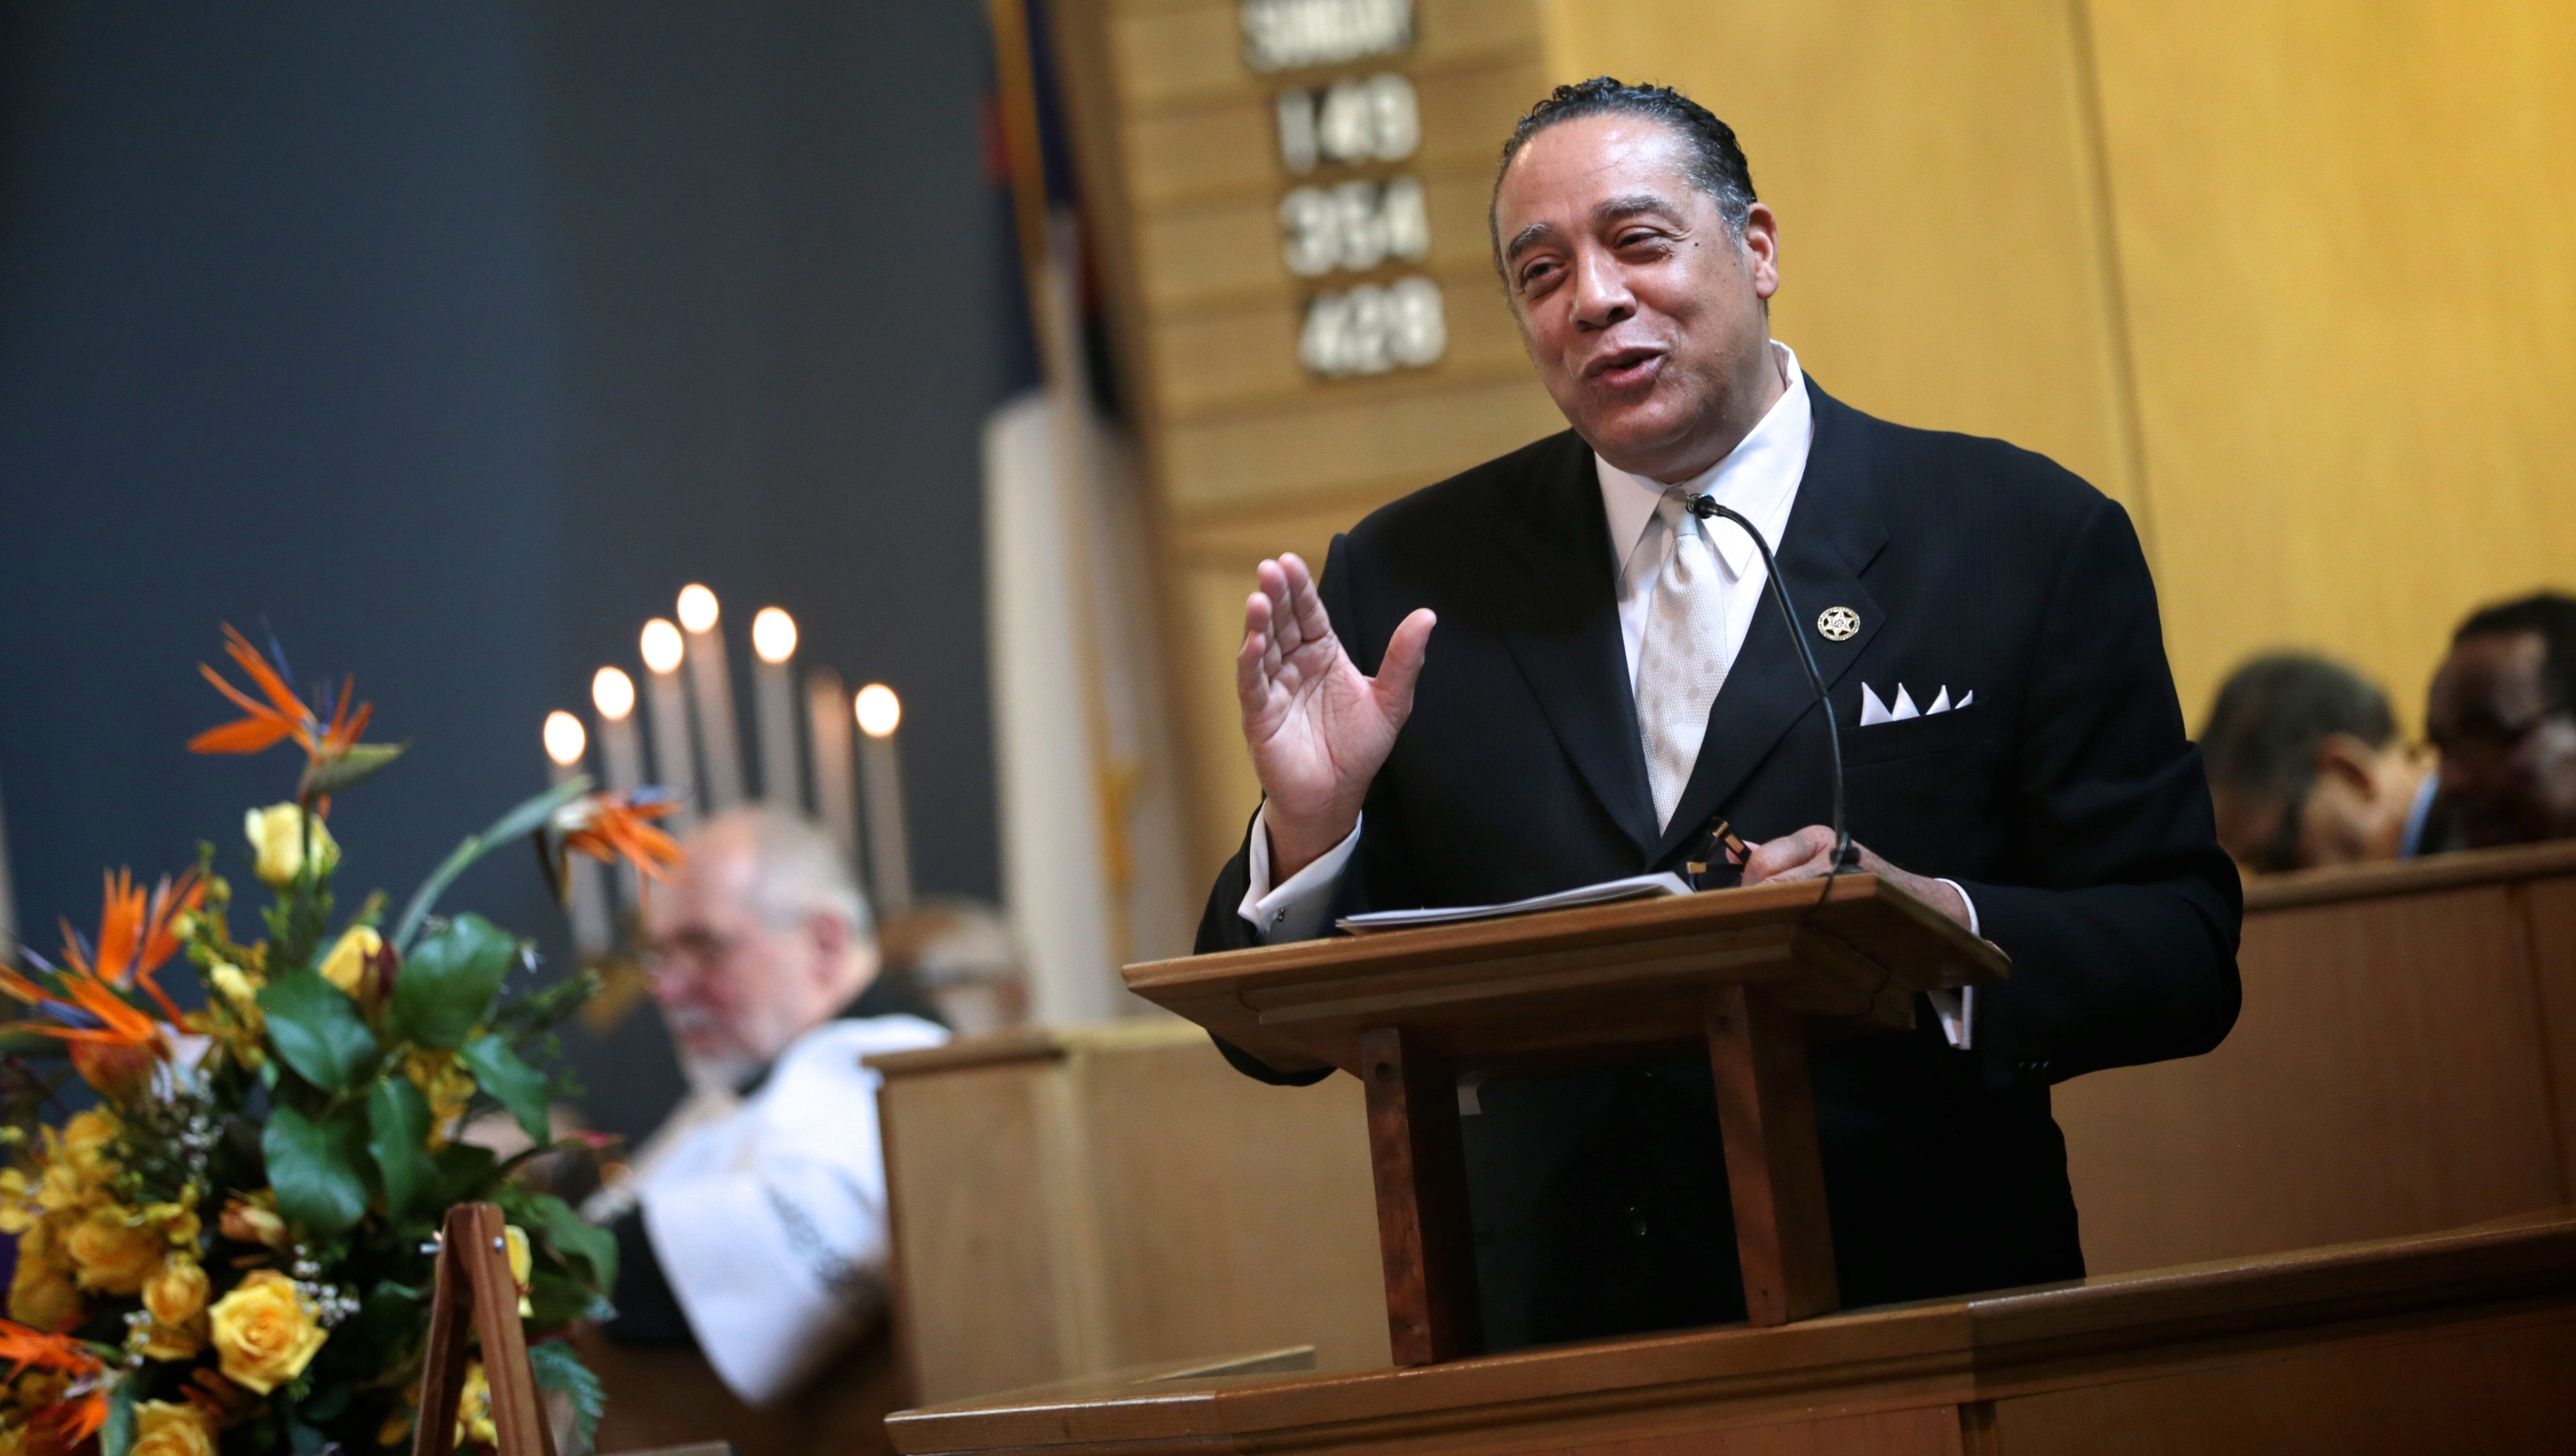 Wayne County Sheriff Benny Napoleon speaks during Gill Hill's funeral service at St. Philip's Evangelical Lutheran Church on Saturday, March 12, 2016, in Detroit.